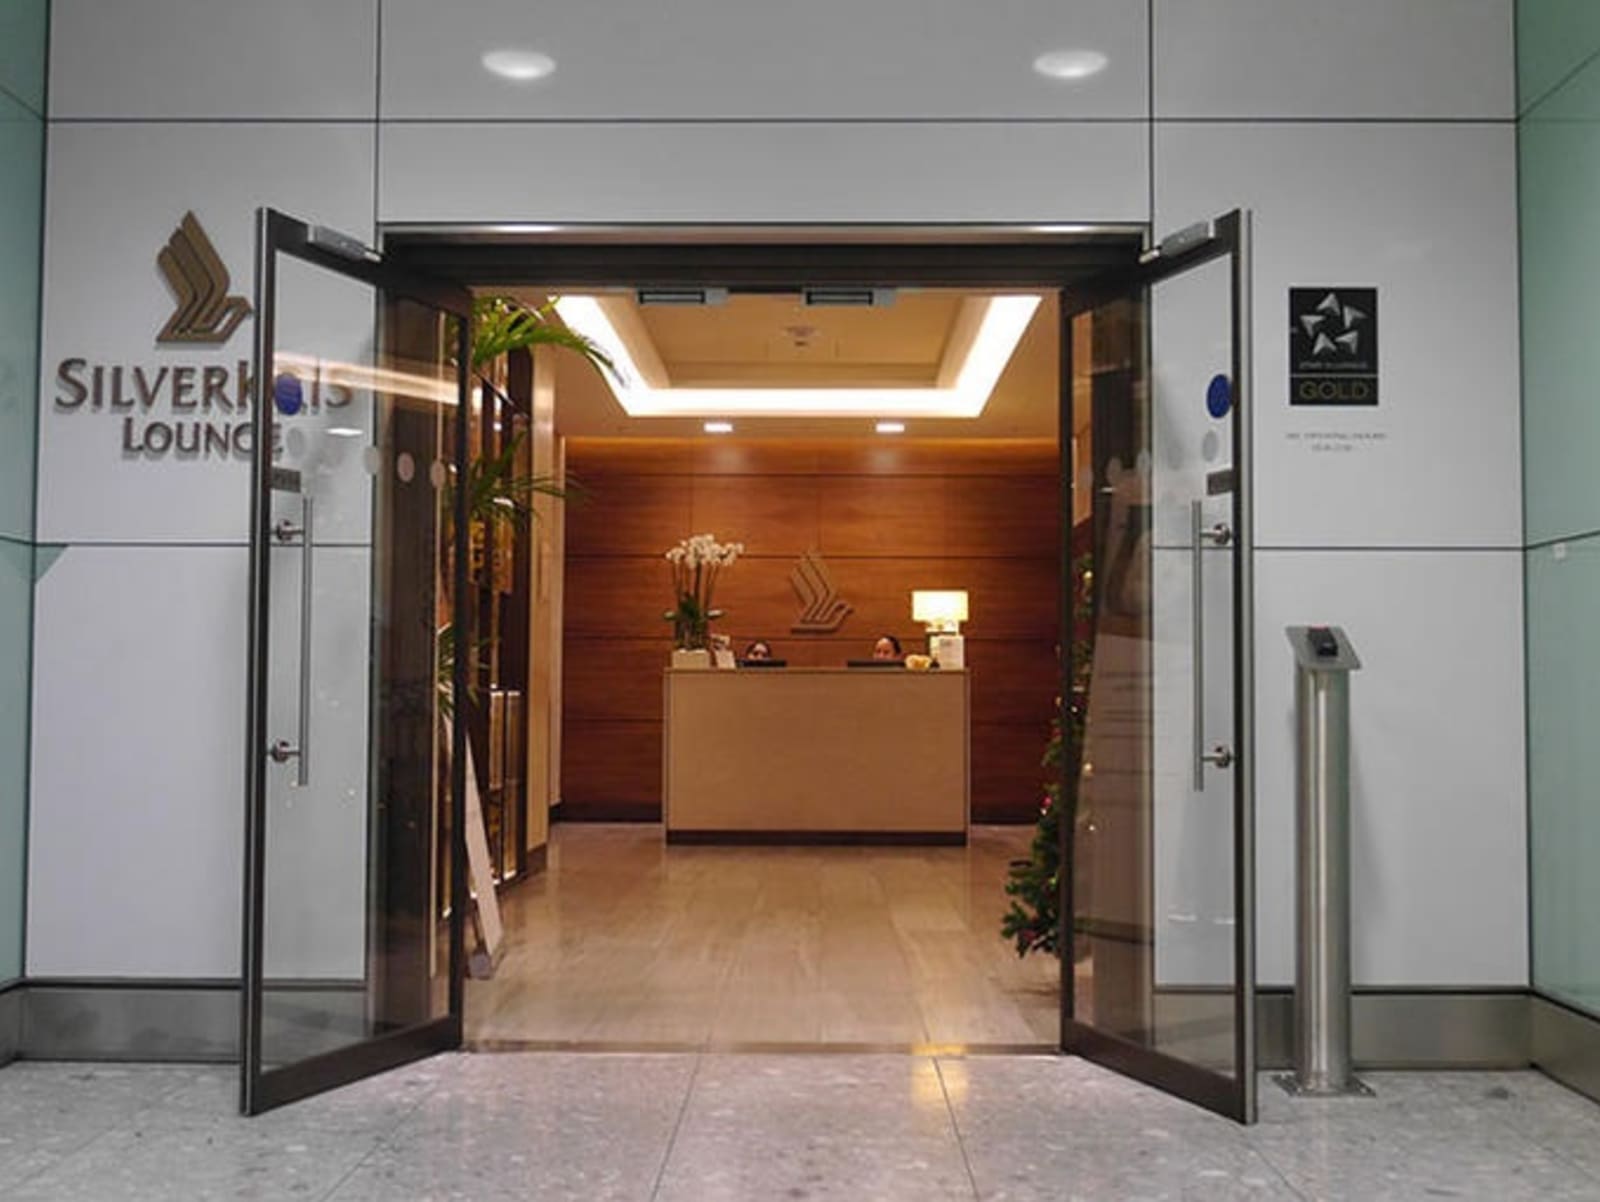 rs-singapore-airlines-lounge-lhr-entrance.jpg